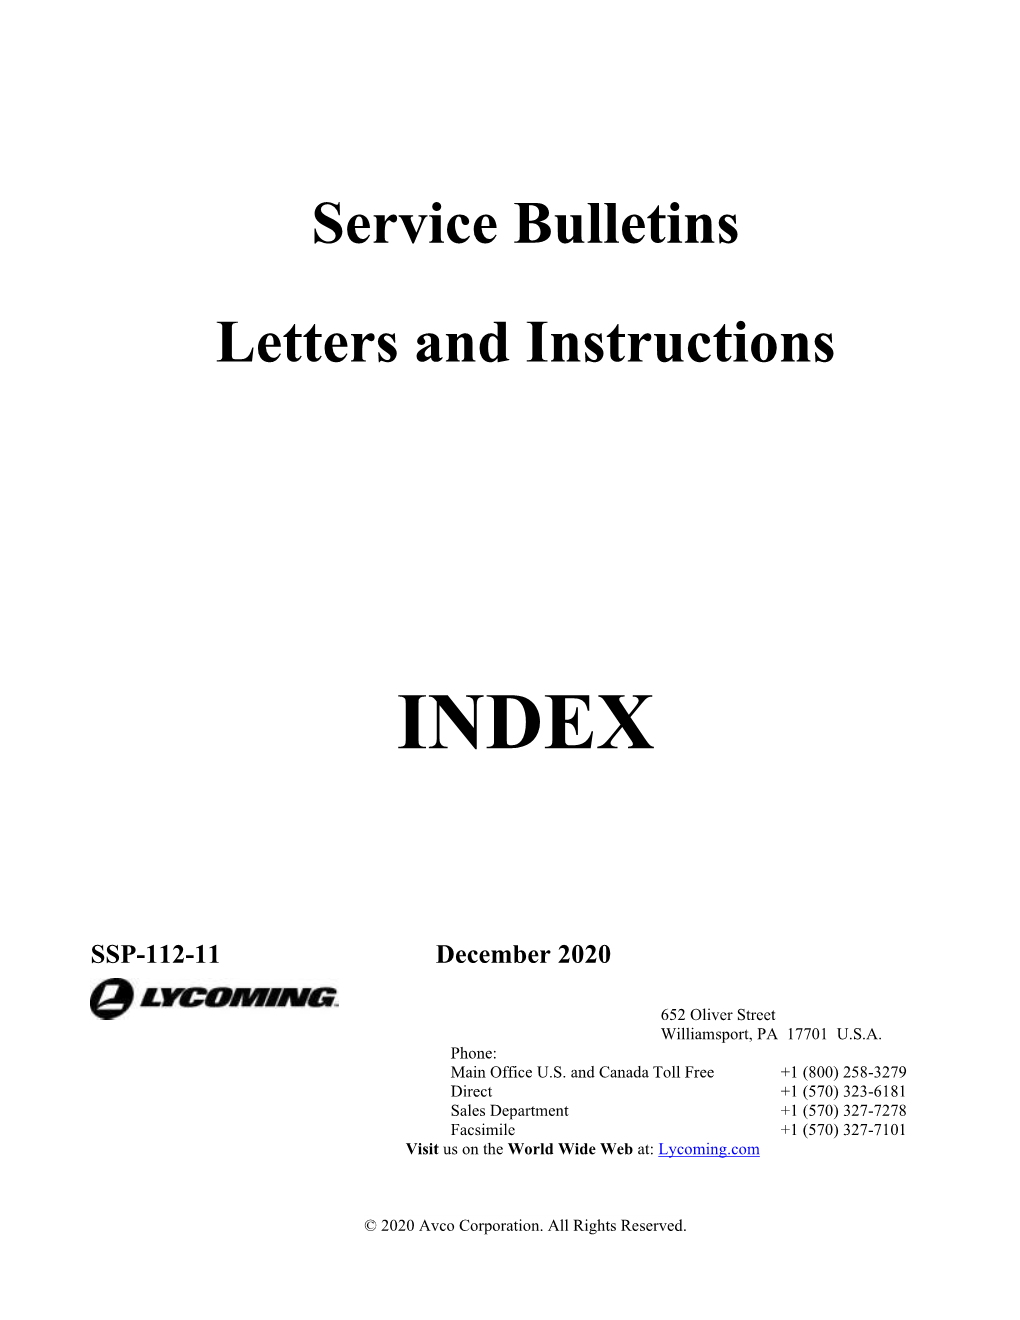 Index of Service Bulletins, Letters and Instructions